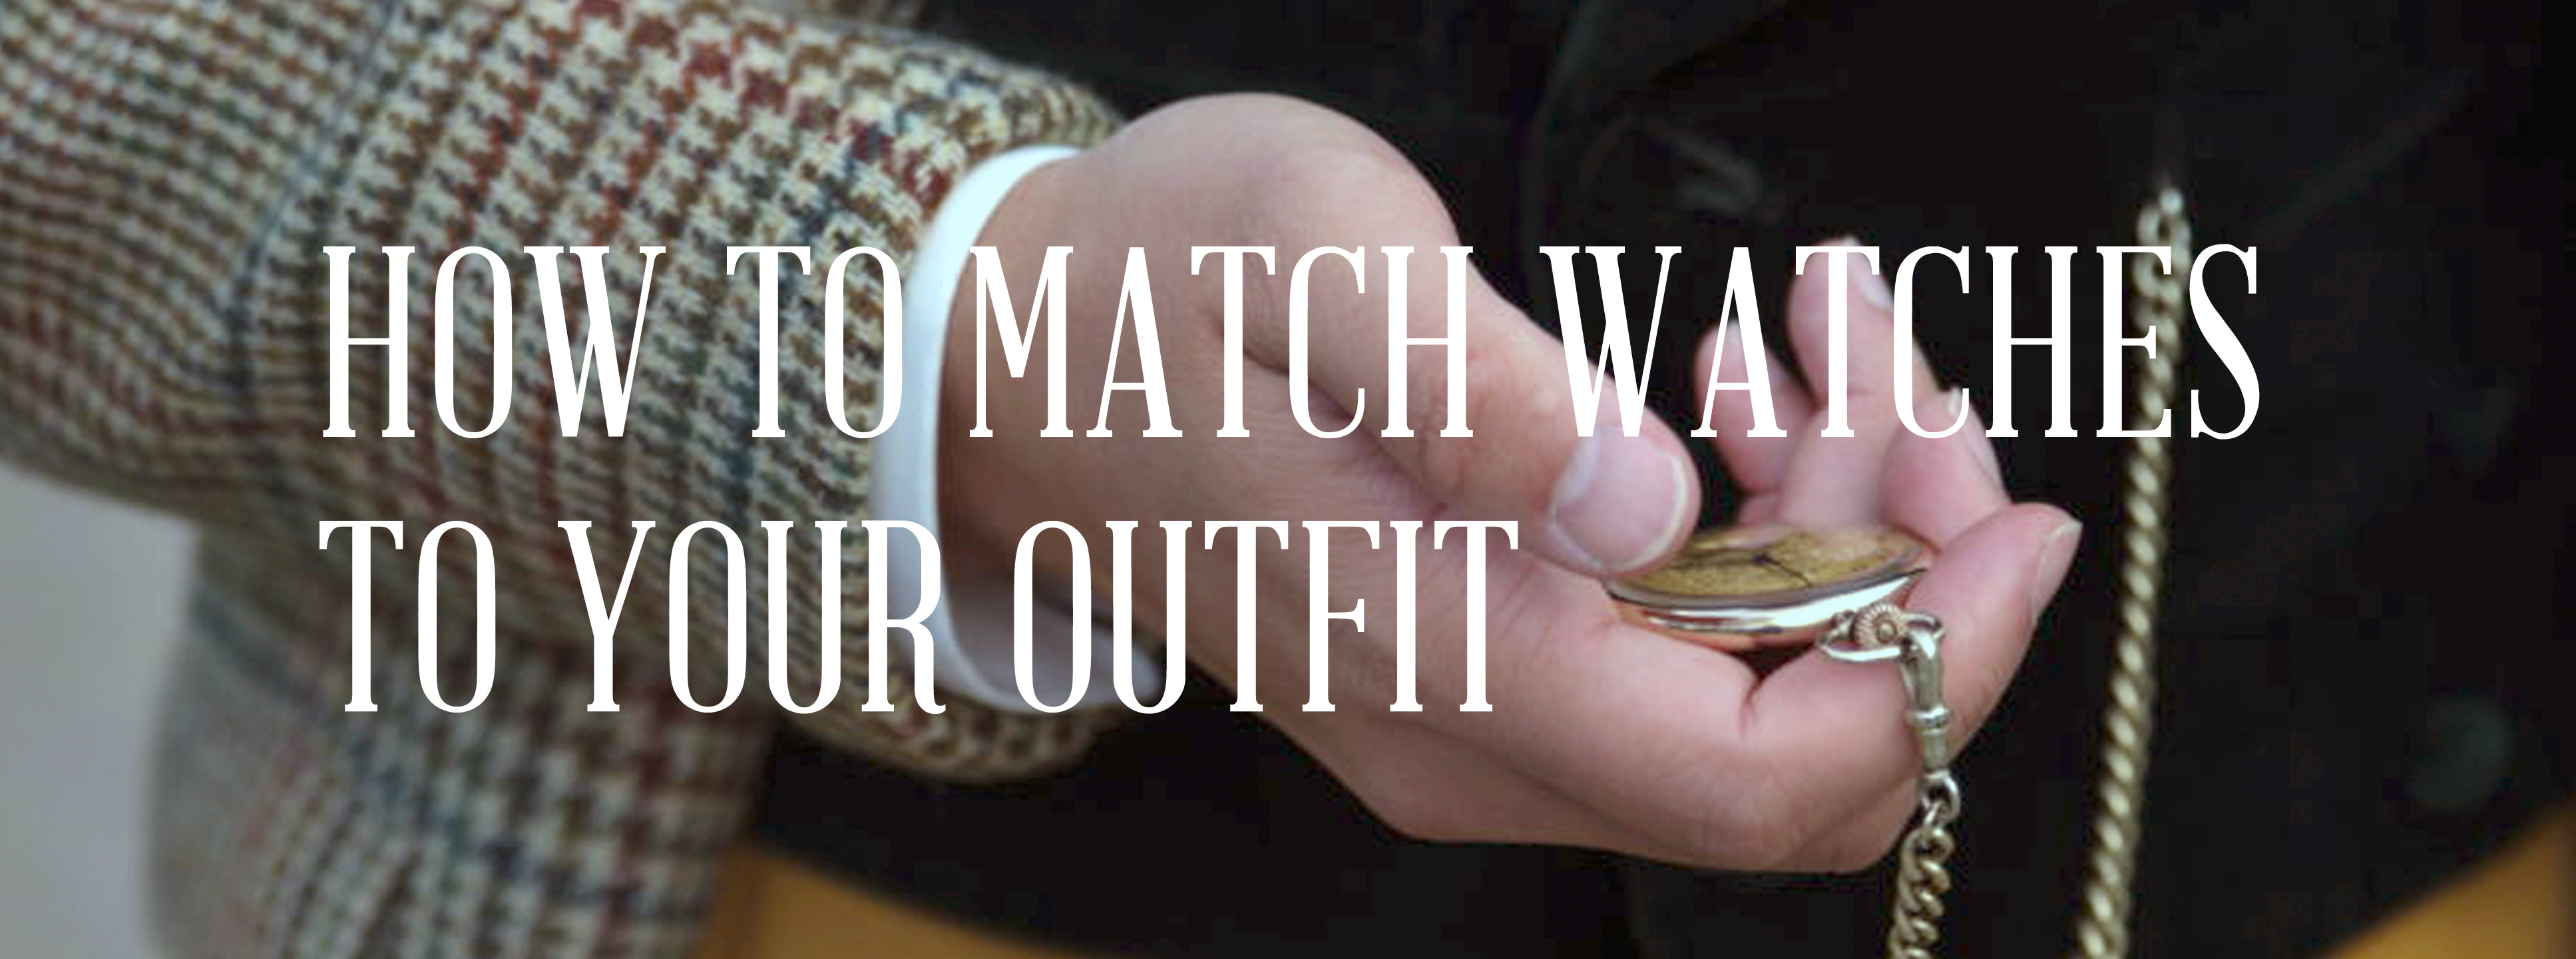 How to match watches to your outfit